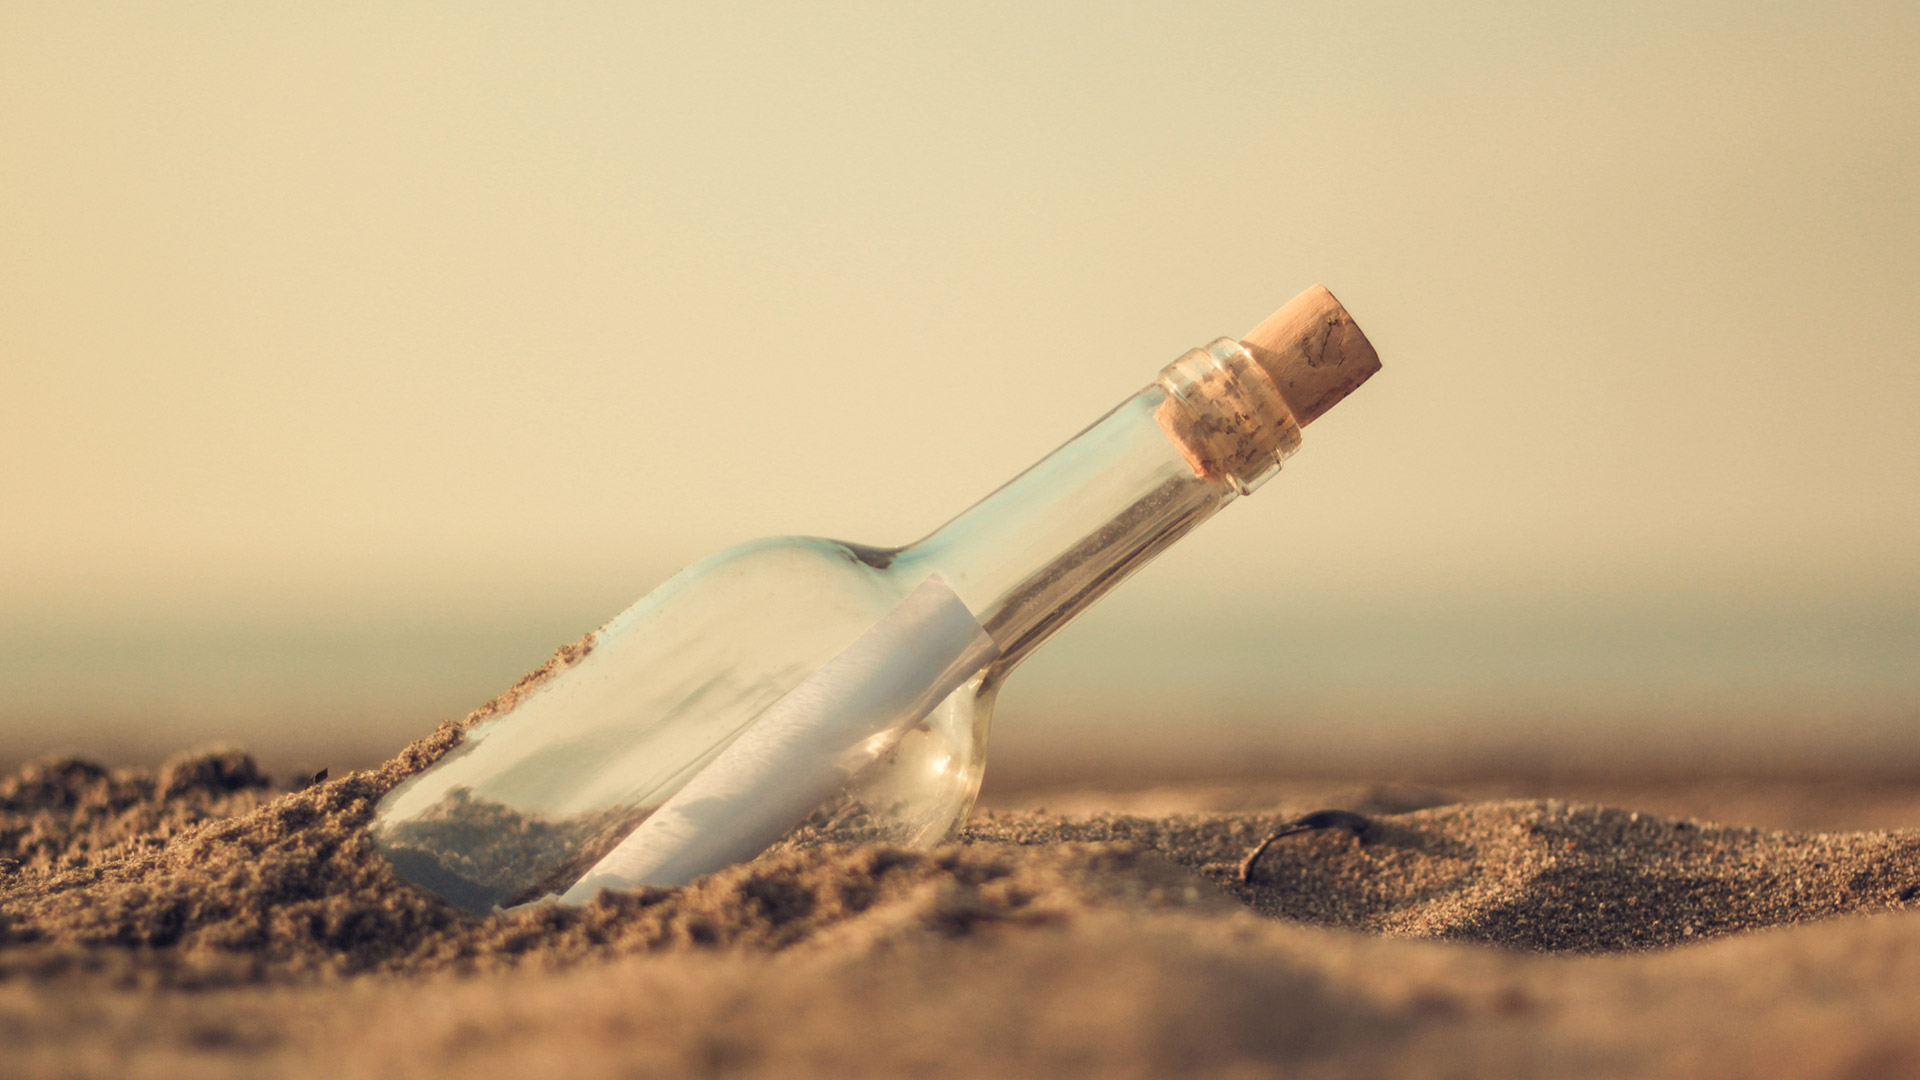 Message in a bottle found on a beach in the sand